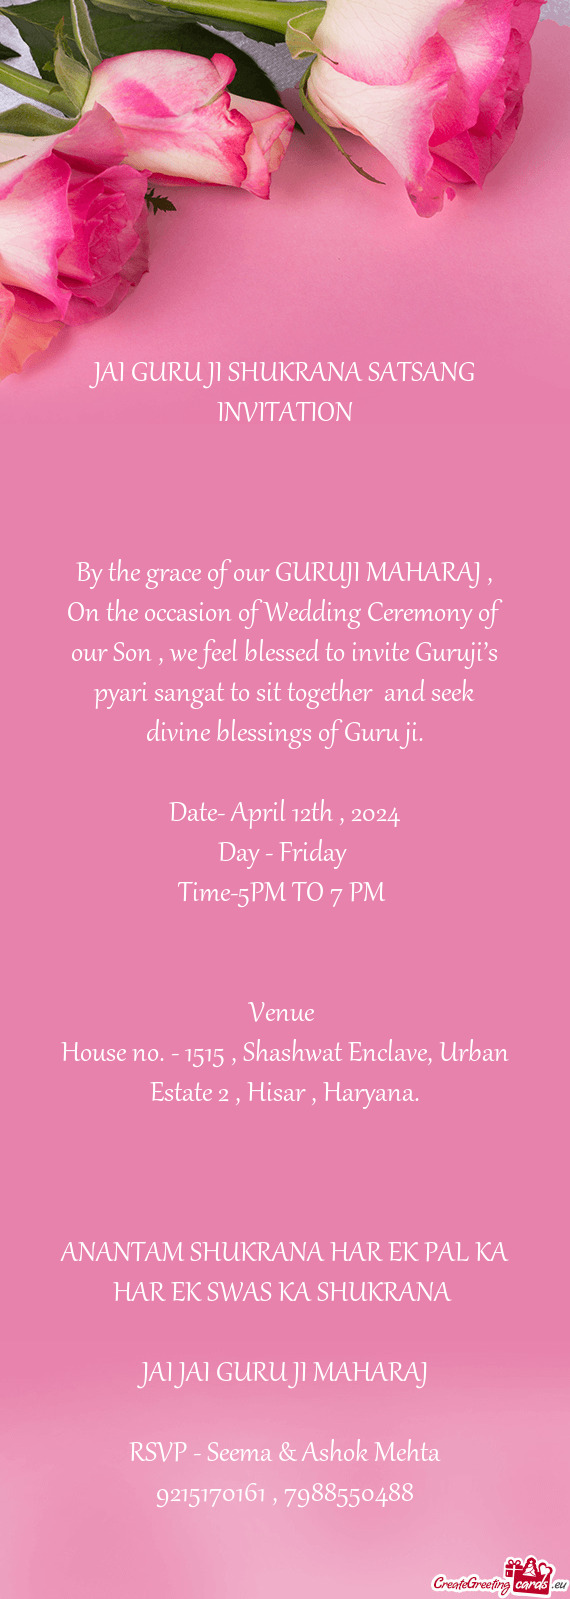 By the grace of our GURUJI MAHARAJ , On the occasion of Wedding Ceremony of our Son , we feel blesse